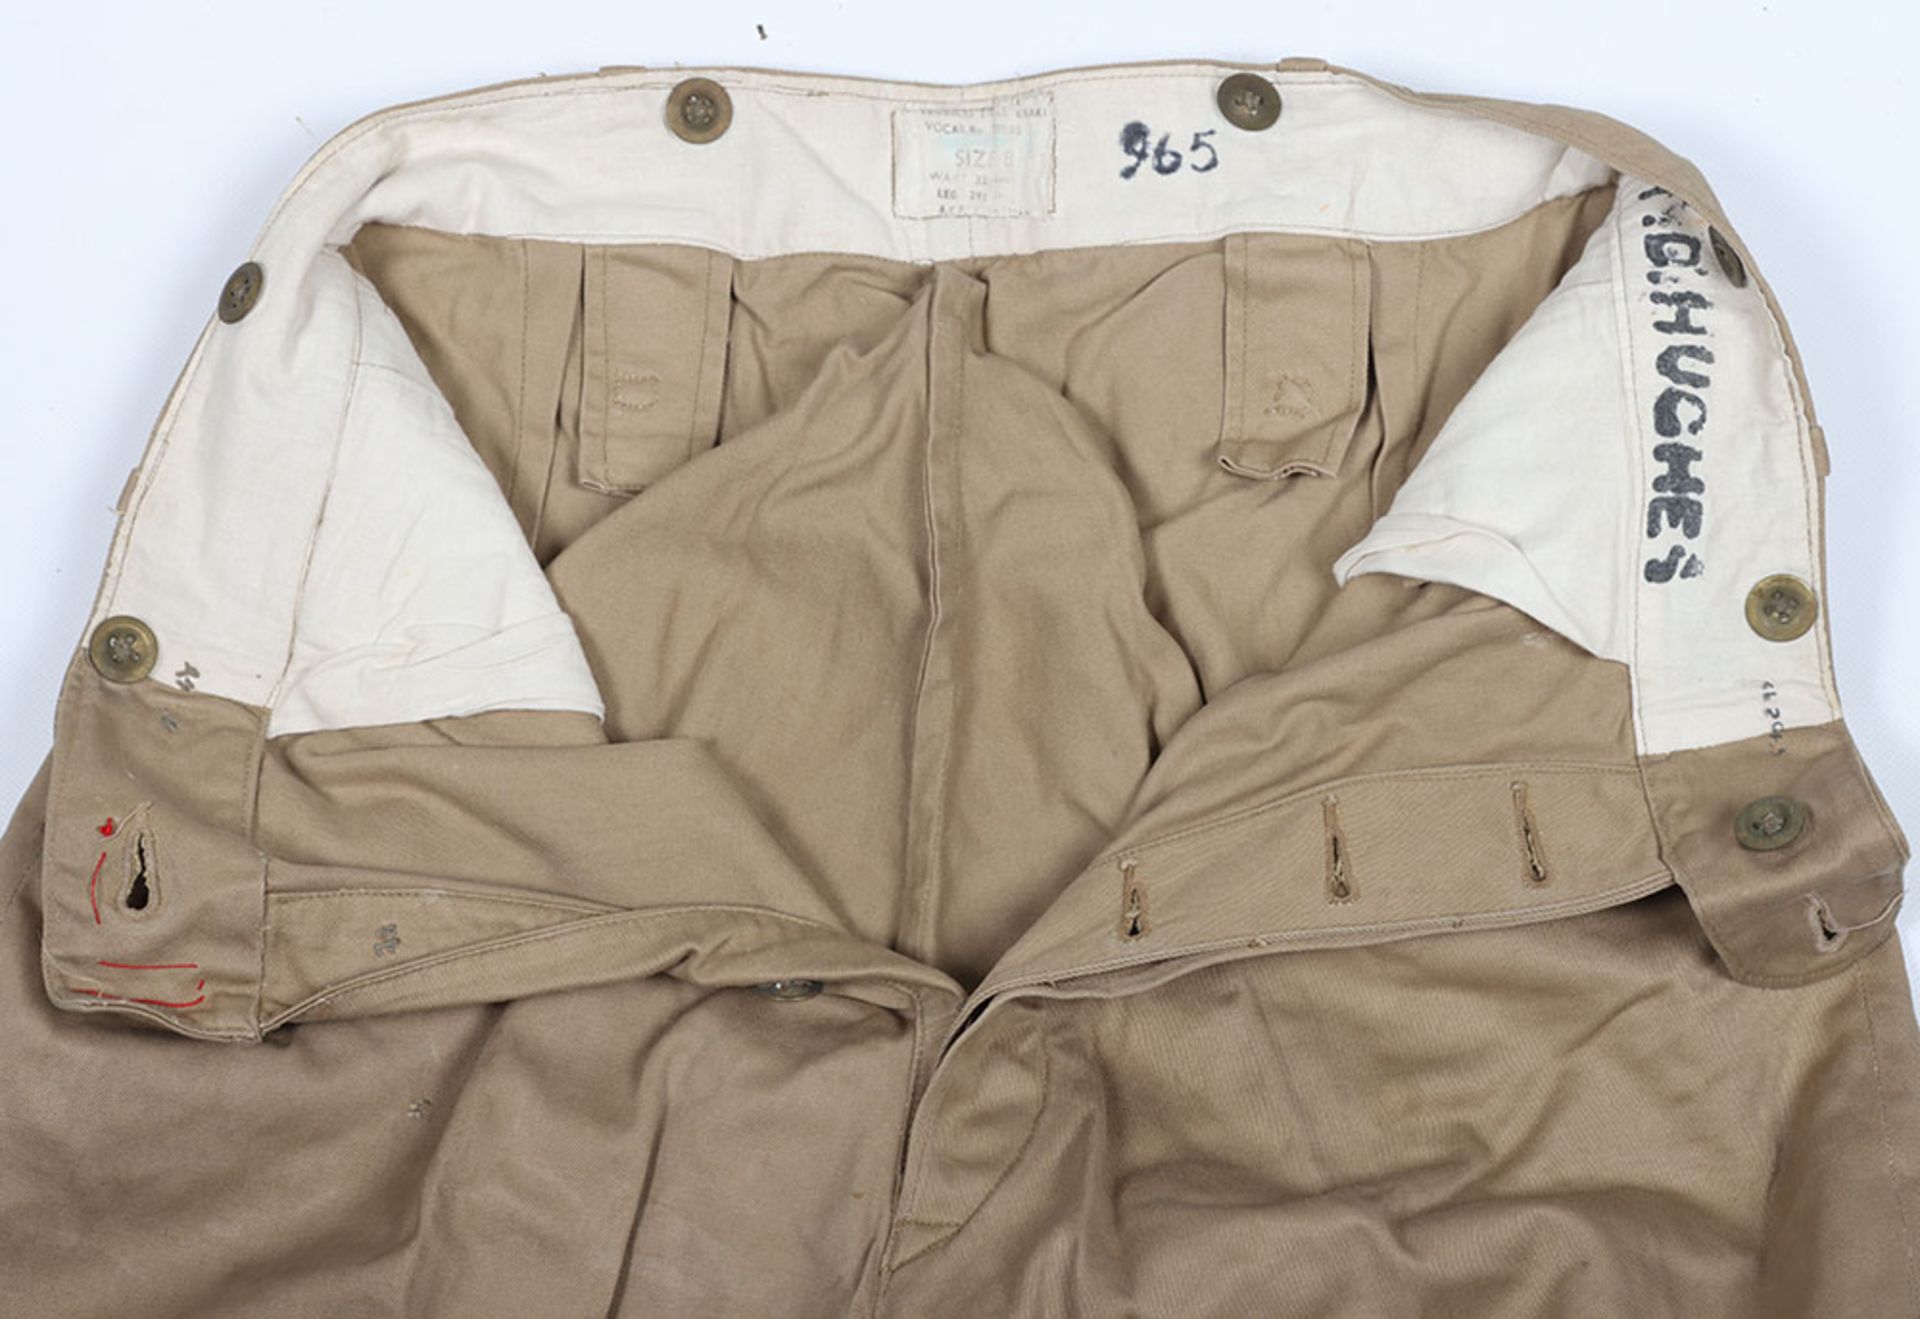 British Post War Royal Marines KD Tunic and Trousers Worn by Swimmer Canoeist T D Hughes During his - Image 13 of 15